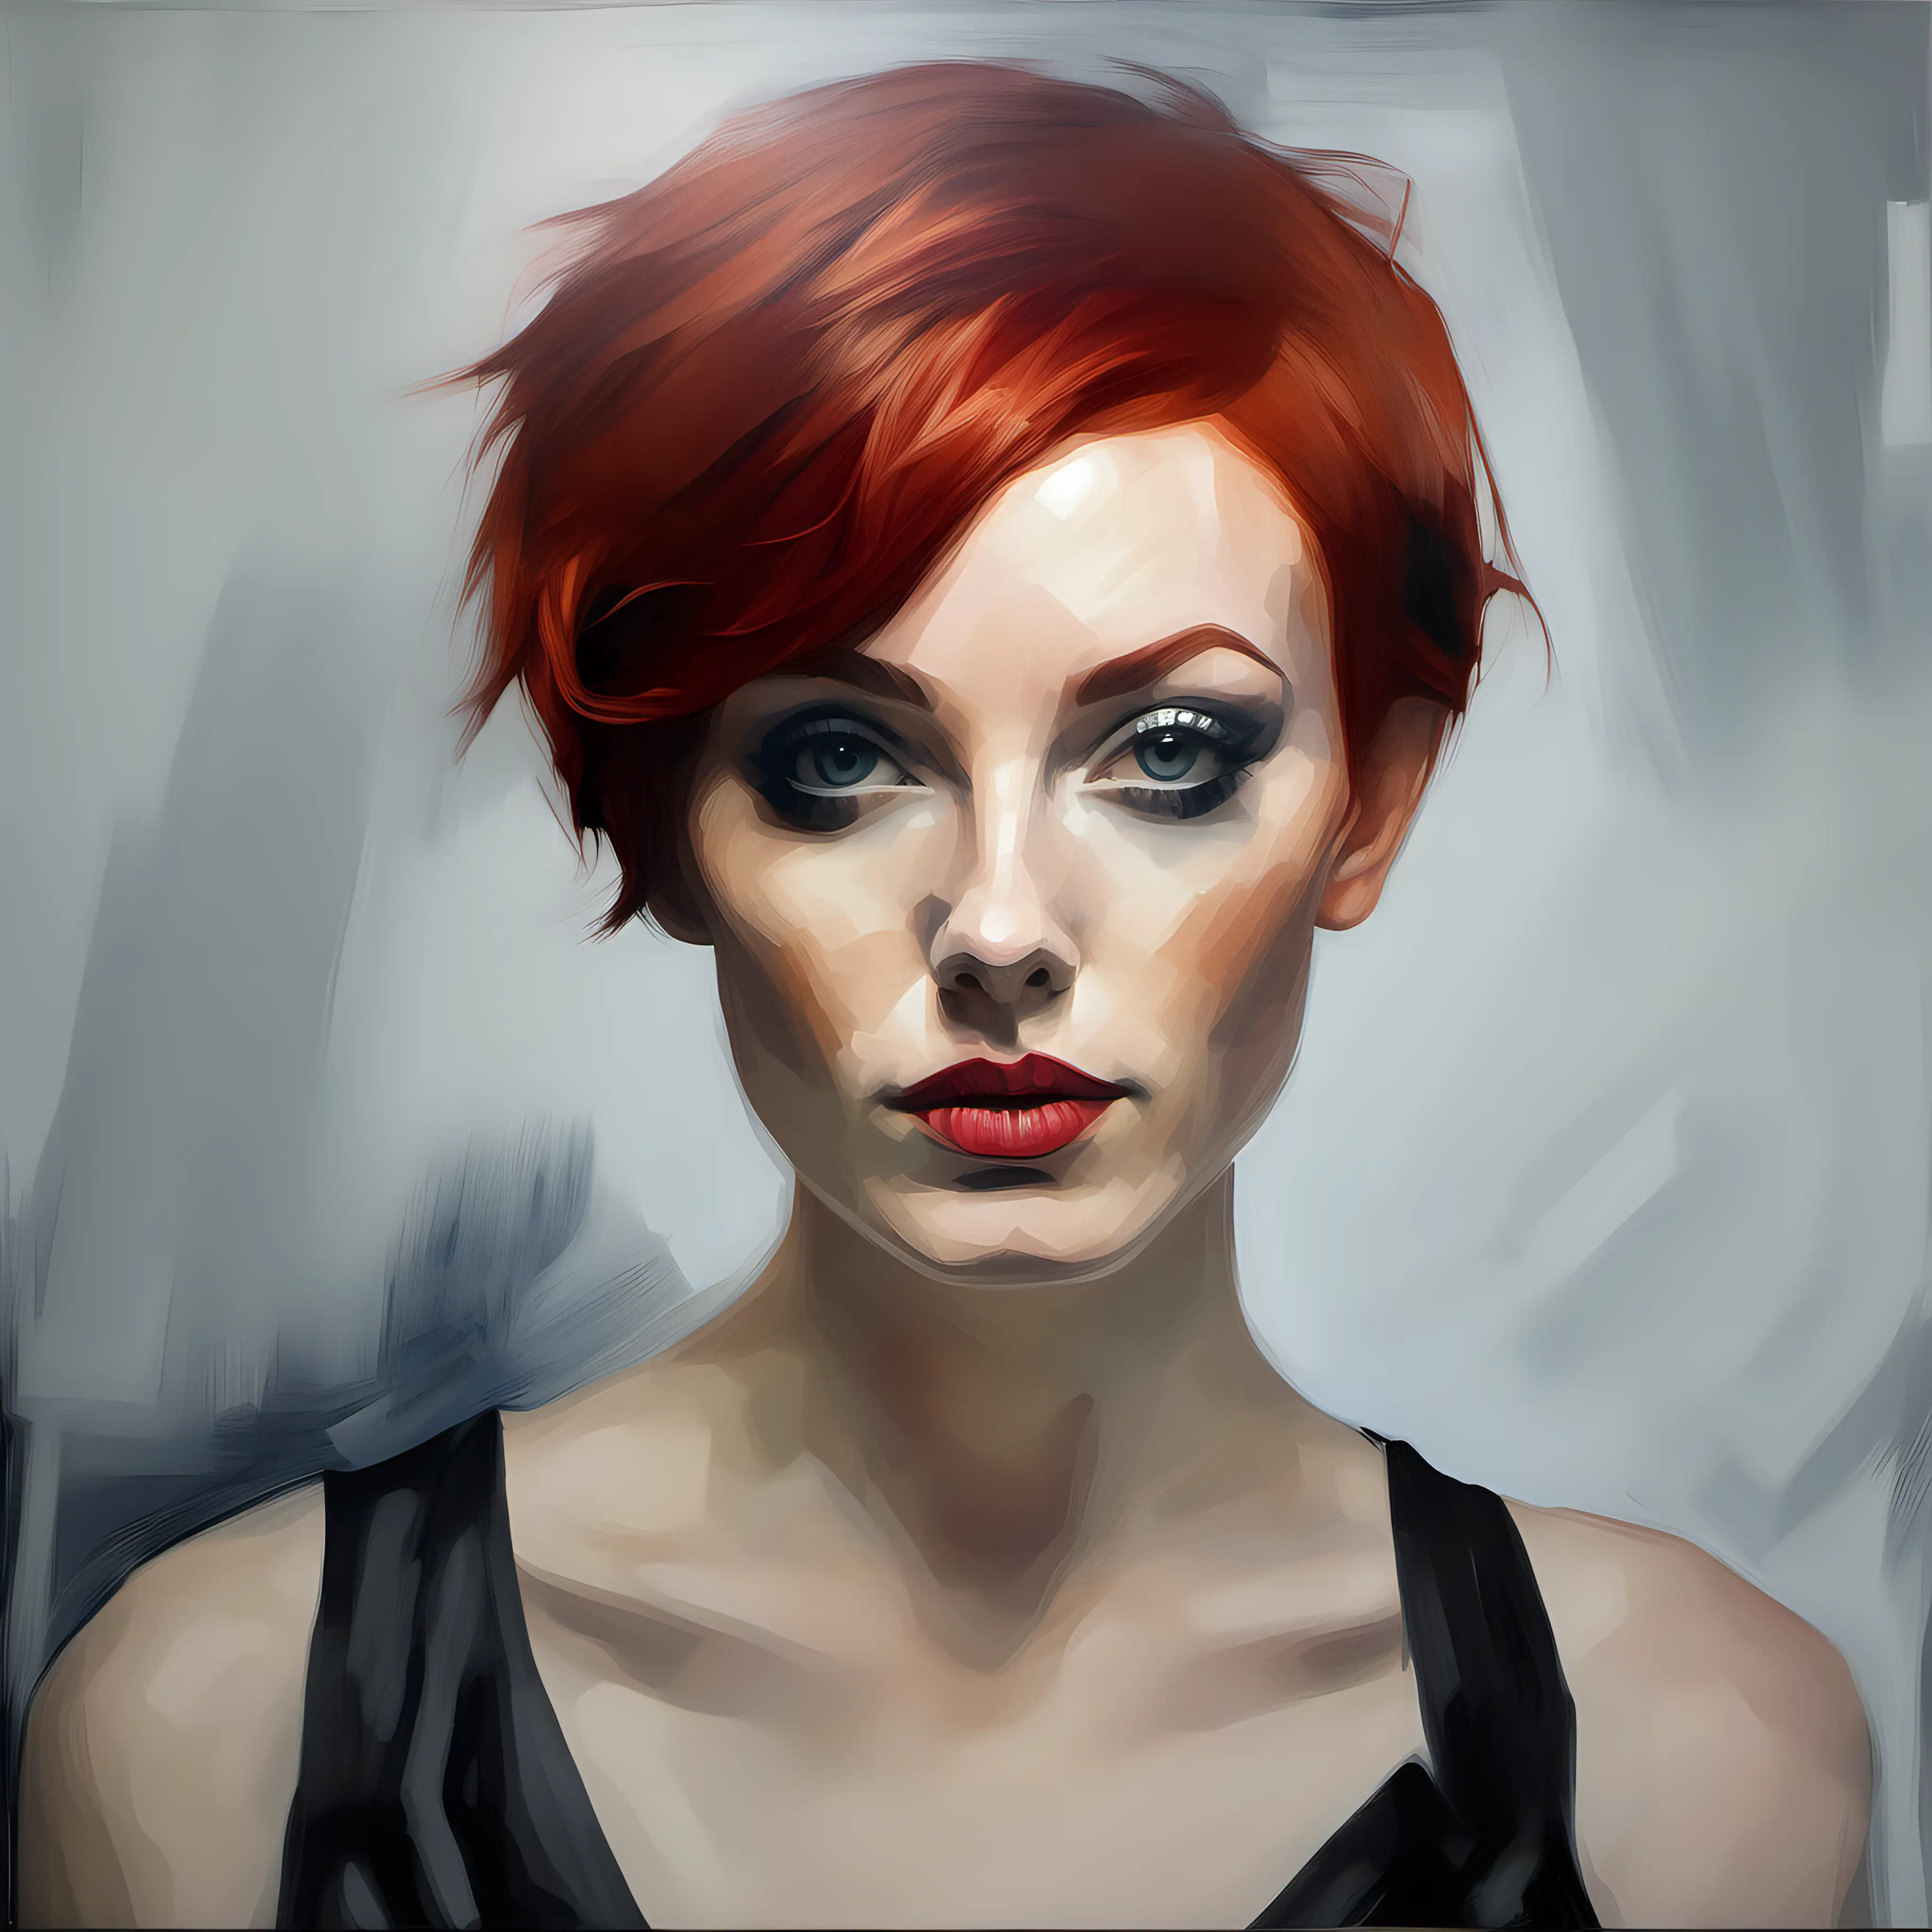 Vibrant Portrait of a Confident Young Woman with Short Red Hair and Full Makeup